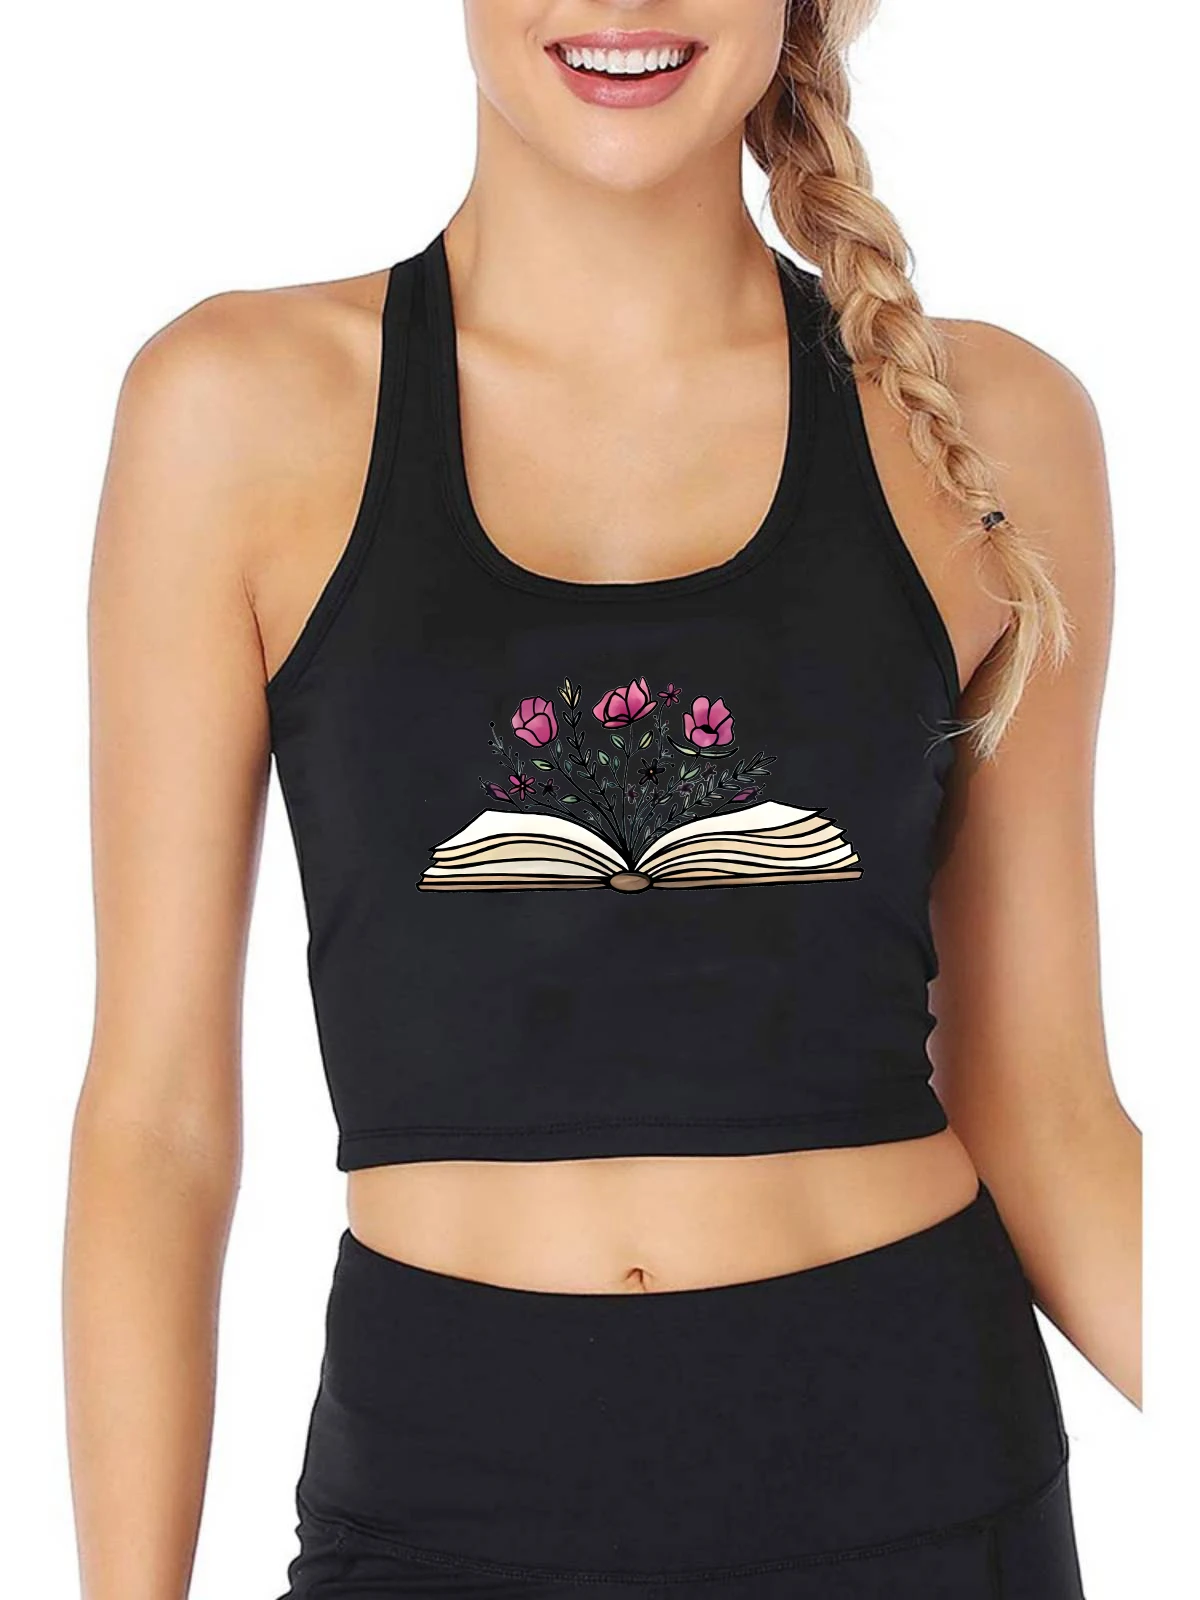 

Lasting Charm New For Book Lover Design Sexy Slim Fit Crop Top Reader Casual Personalized Tank Tops Summer Camisole